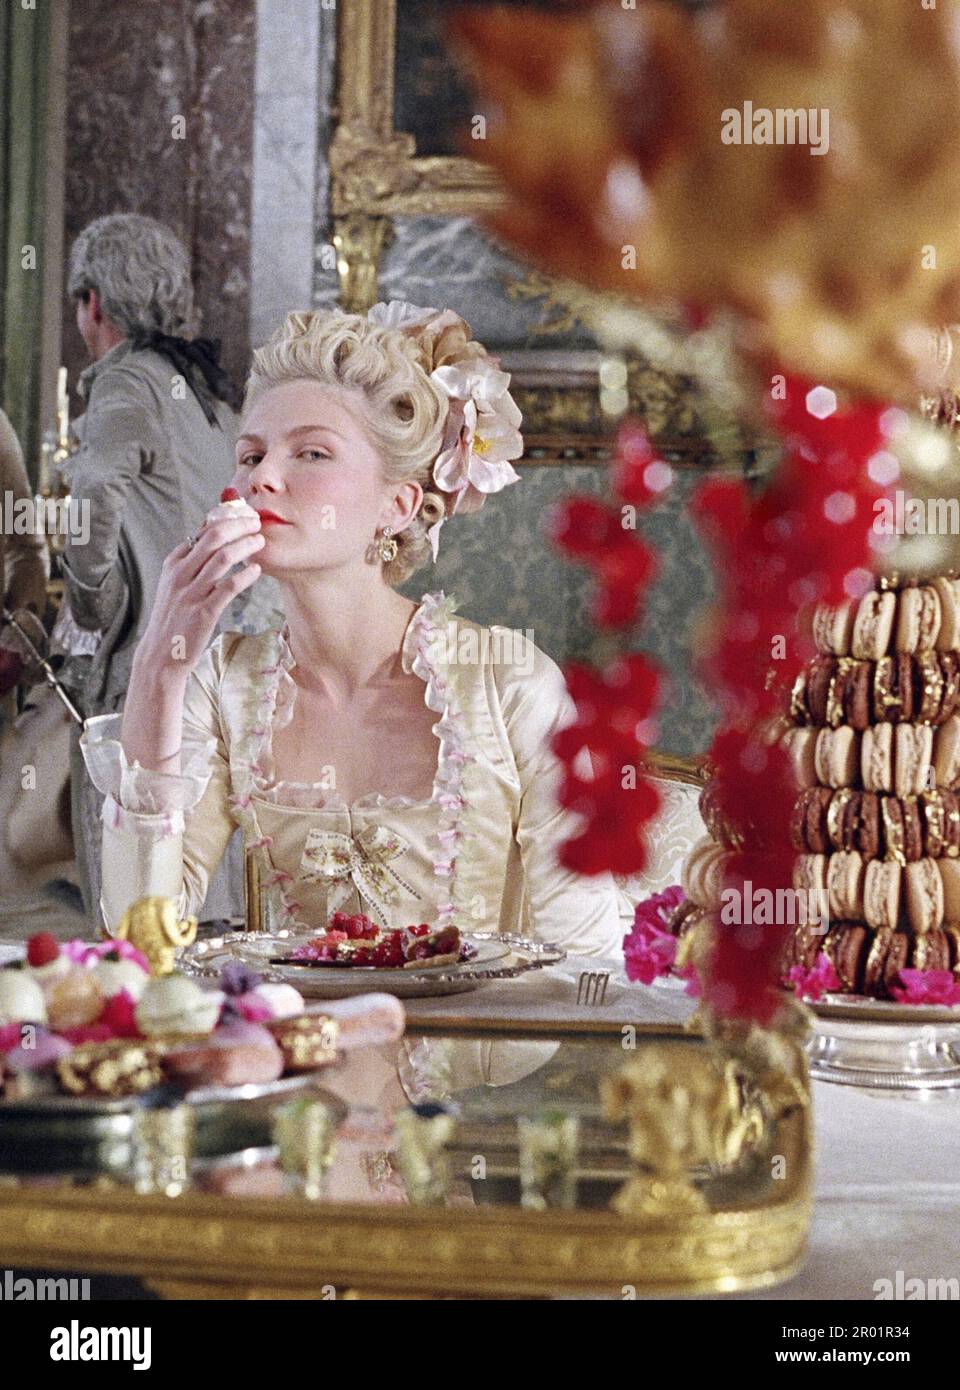 KIRSTEN DUNST in MARIE ANTOINETTE (2006), directed by SOFIA COPPOLA. Credit: COLUMBIA PICTURES CORPORATION/AMERICAN ZOETROPE / Album Stock Photo